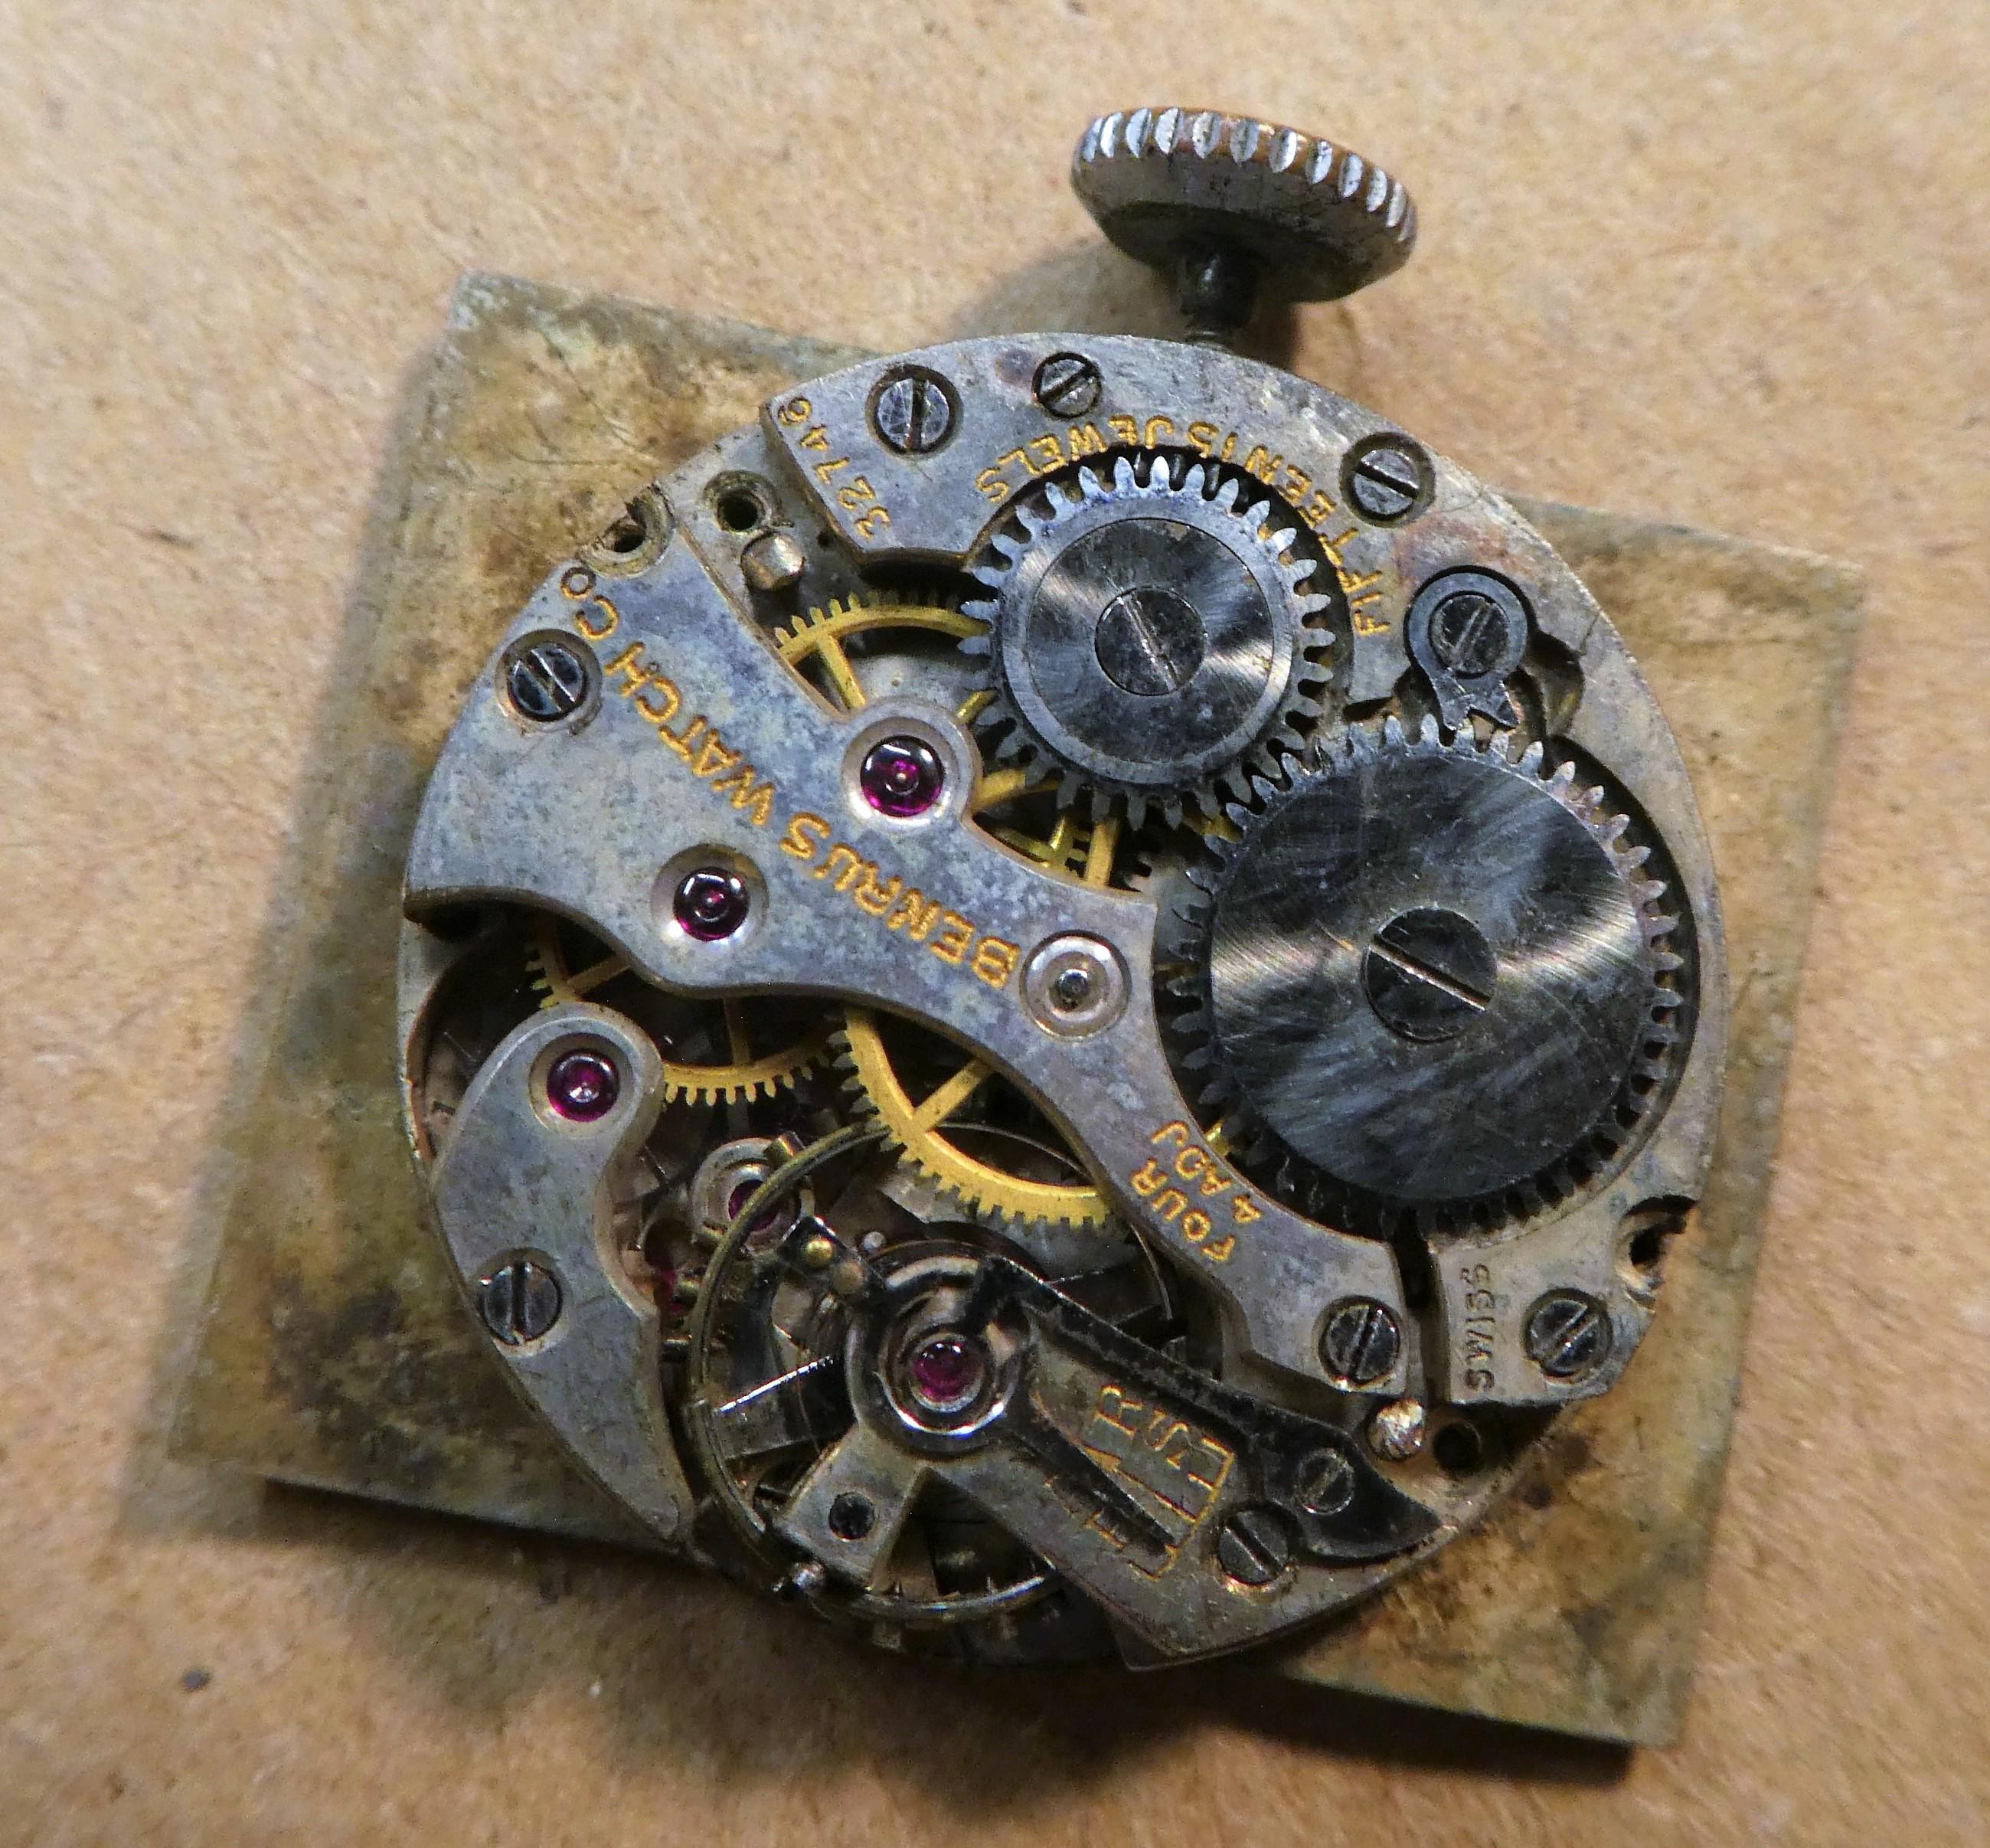 FHF identification help - Identify This Movement or Watch - Watch ...